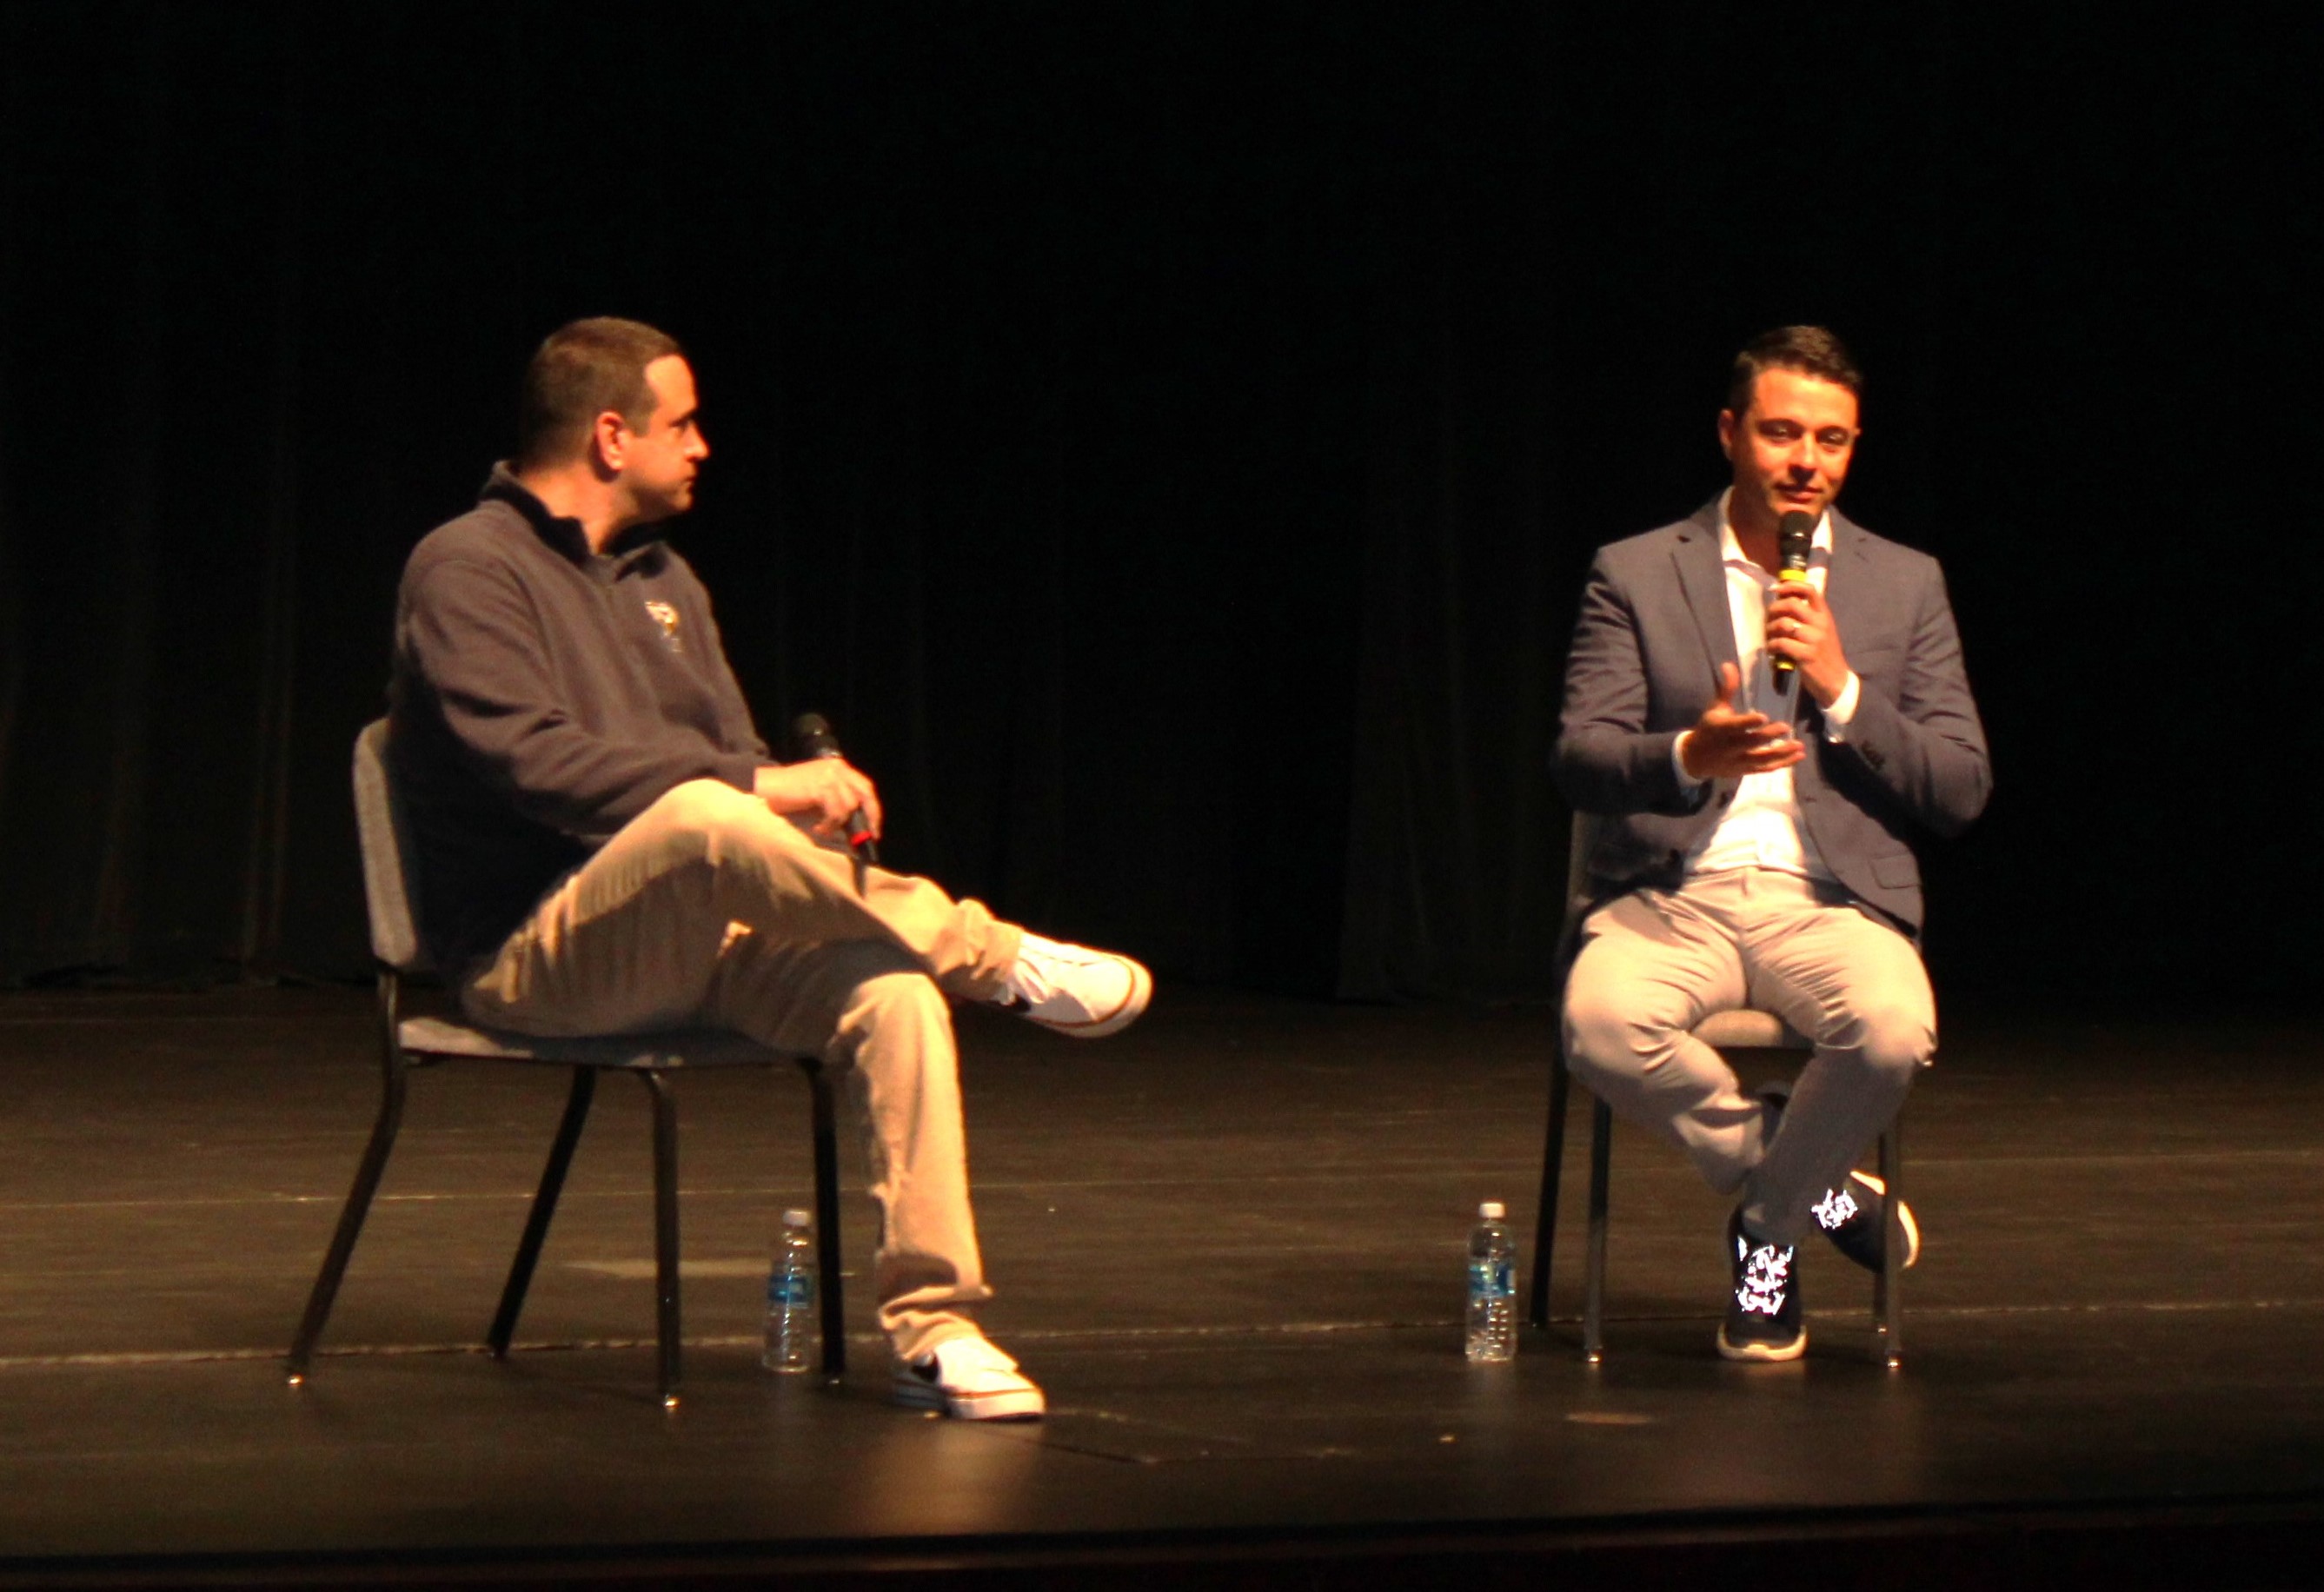 Nick Schwien, director of Tiger Media Network, and Michael Schwanke, KWCH Eyewitness News anchor, discuss journalism and related topics at Beach Schmidt Performing Arts Center March 25.